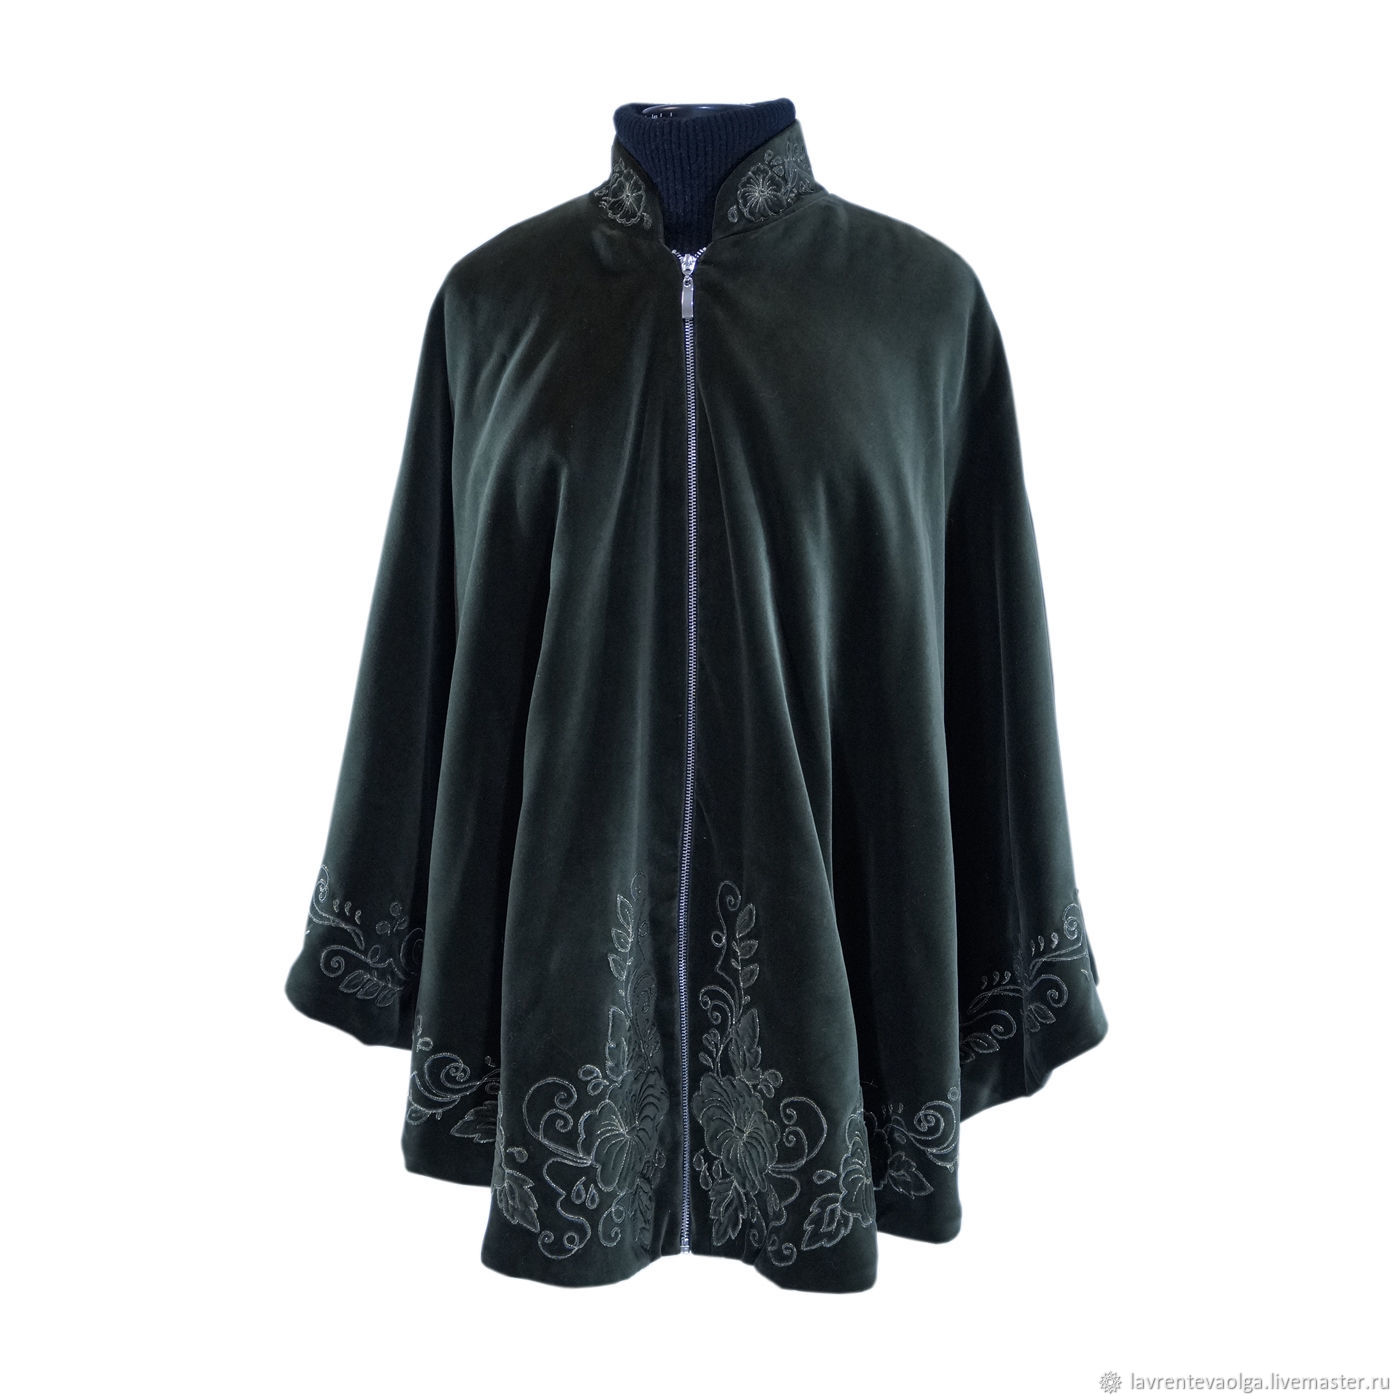 Velvet coat poncho with author embroidery dark green color, Coats, Moscow,  Фото №1